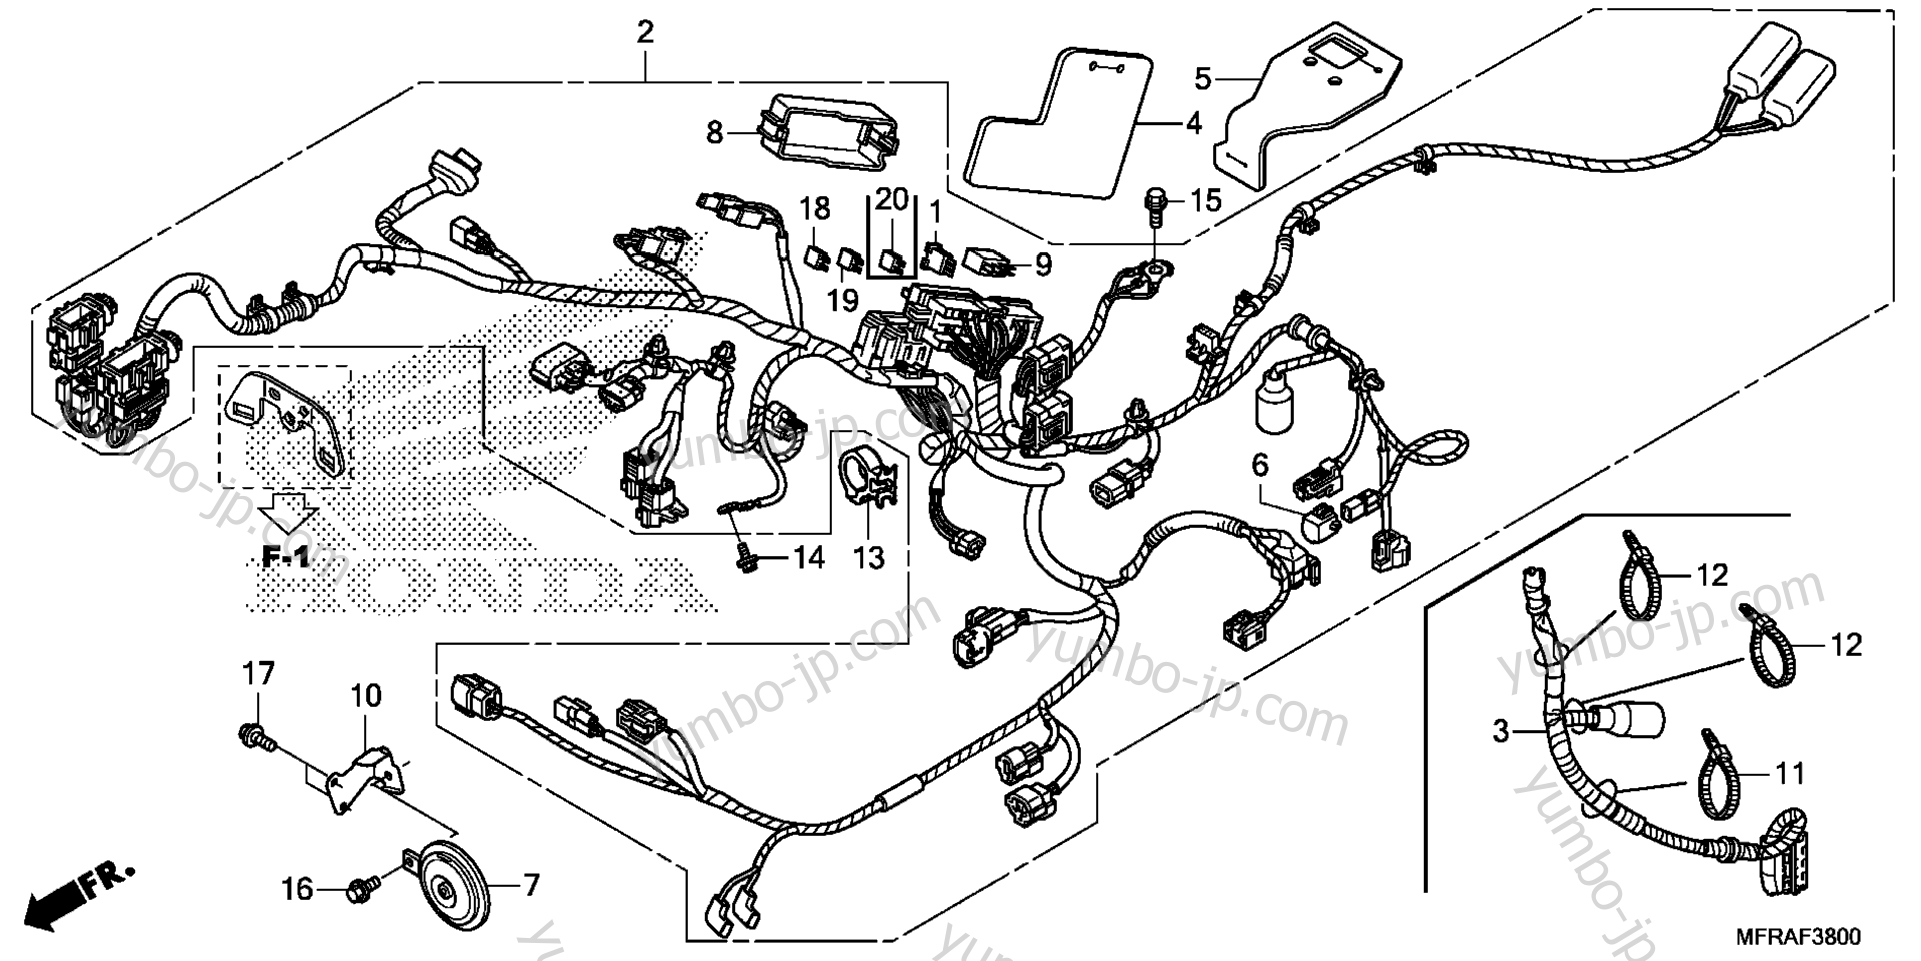 WIRE HARNESS (1) for motorcycles HONDA VT1300CR A 2013 year